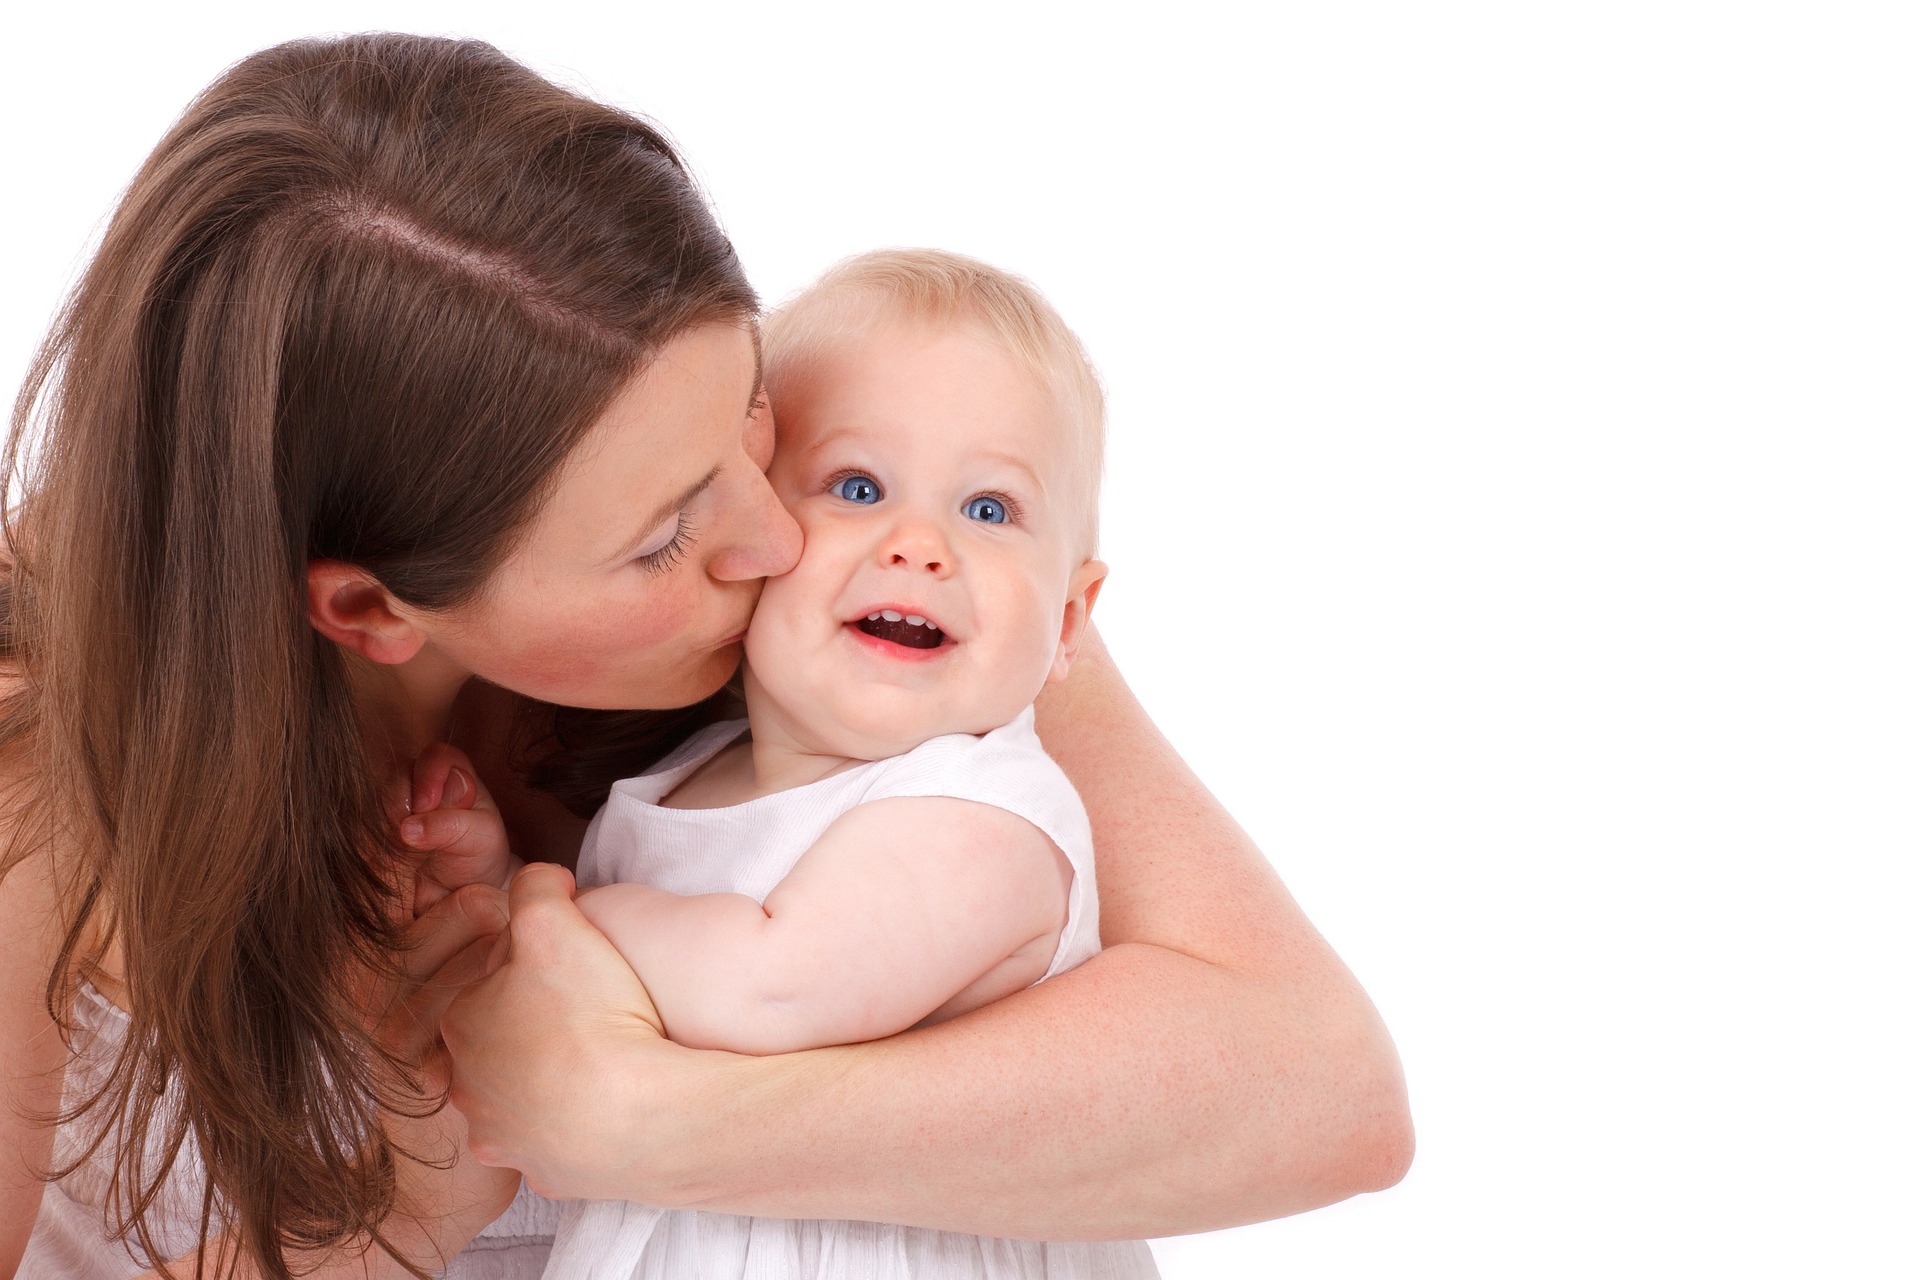 Parenting Tips for Single Mothers